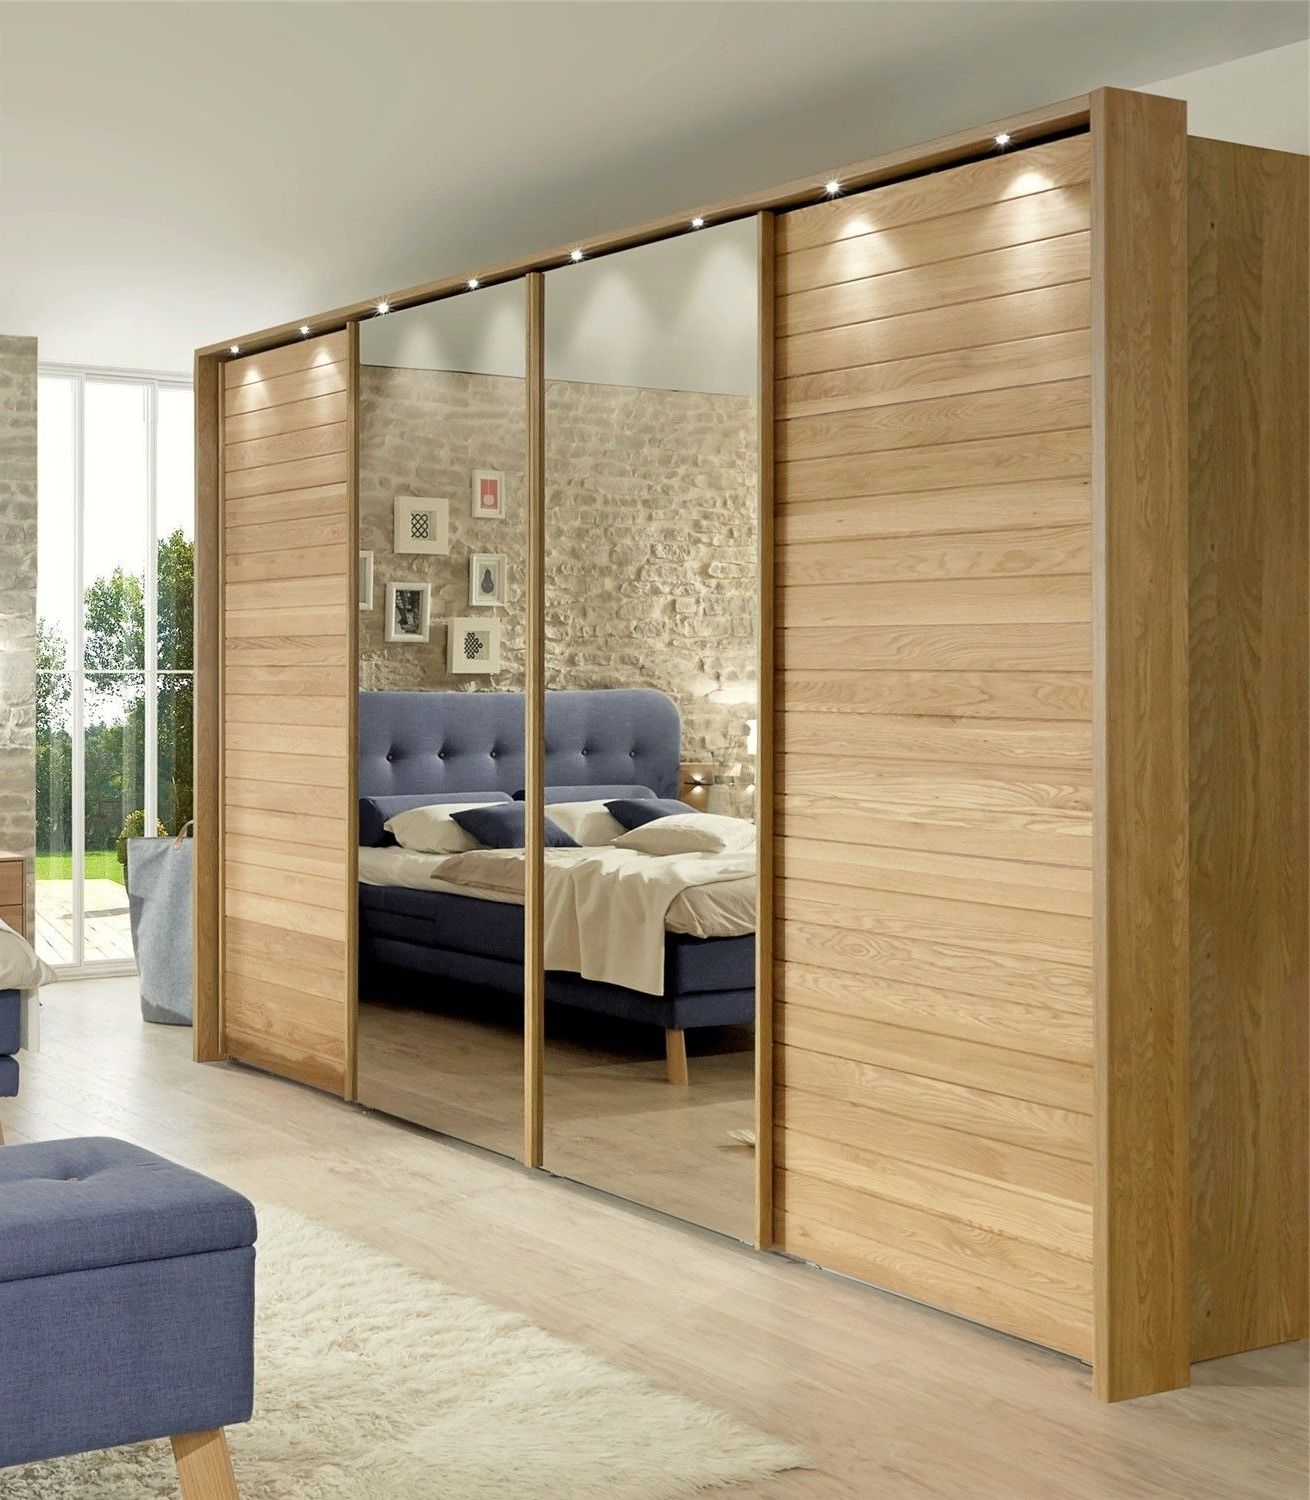 Jupiter By Stylform Semi Solid Oak And Glass Or Mirror Sliding Pertaining To Latest Oak Mirrored Wardrobes (View 1 of 15)